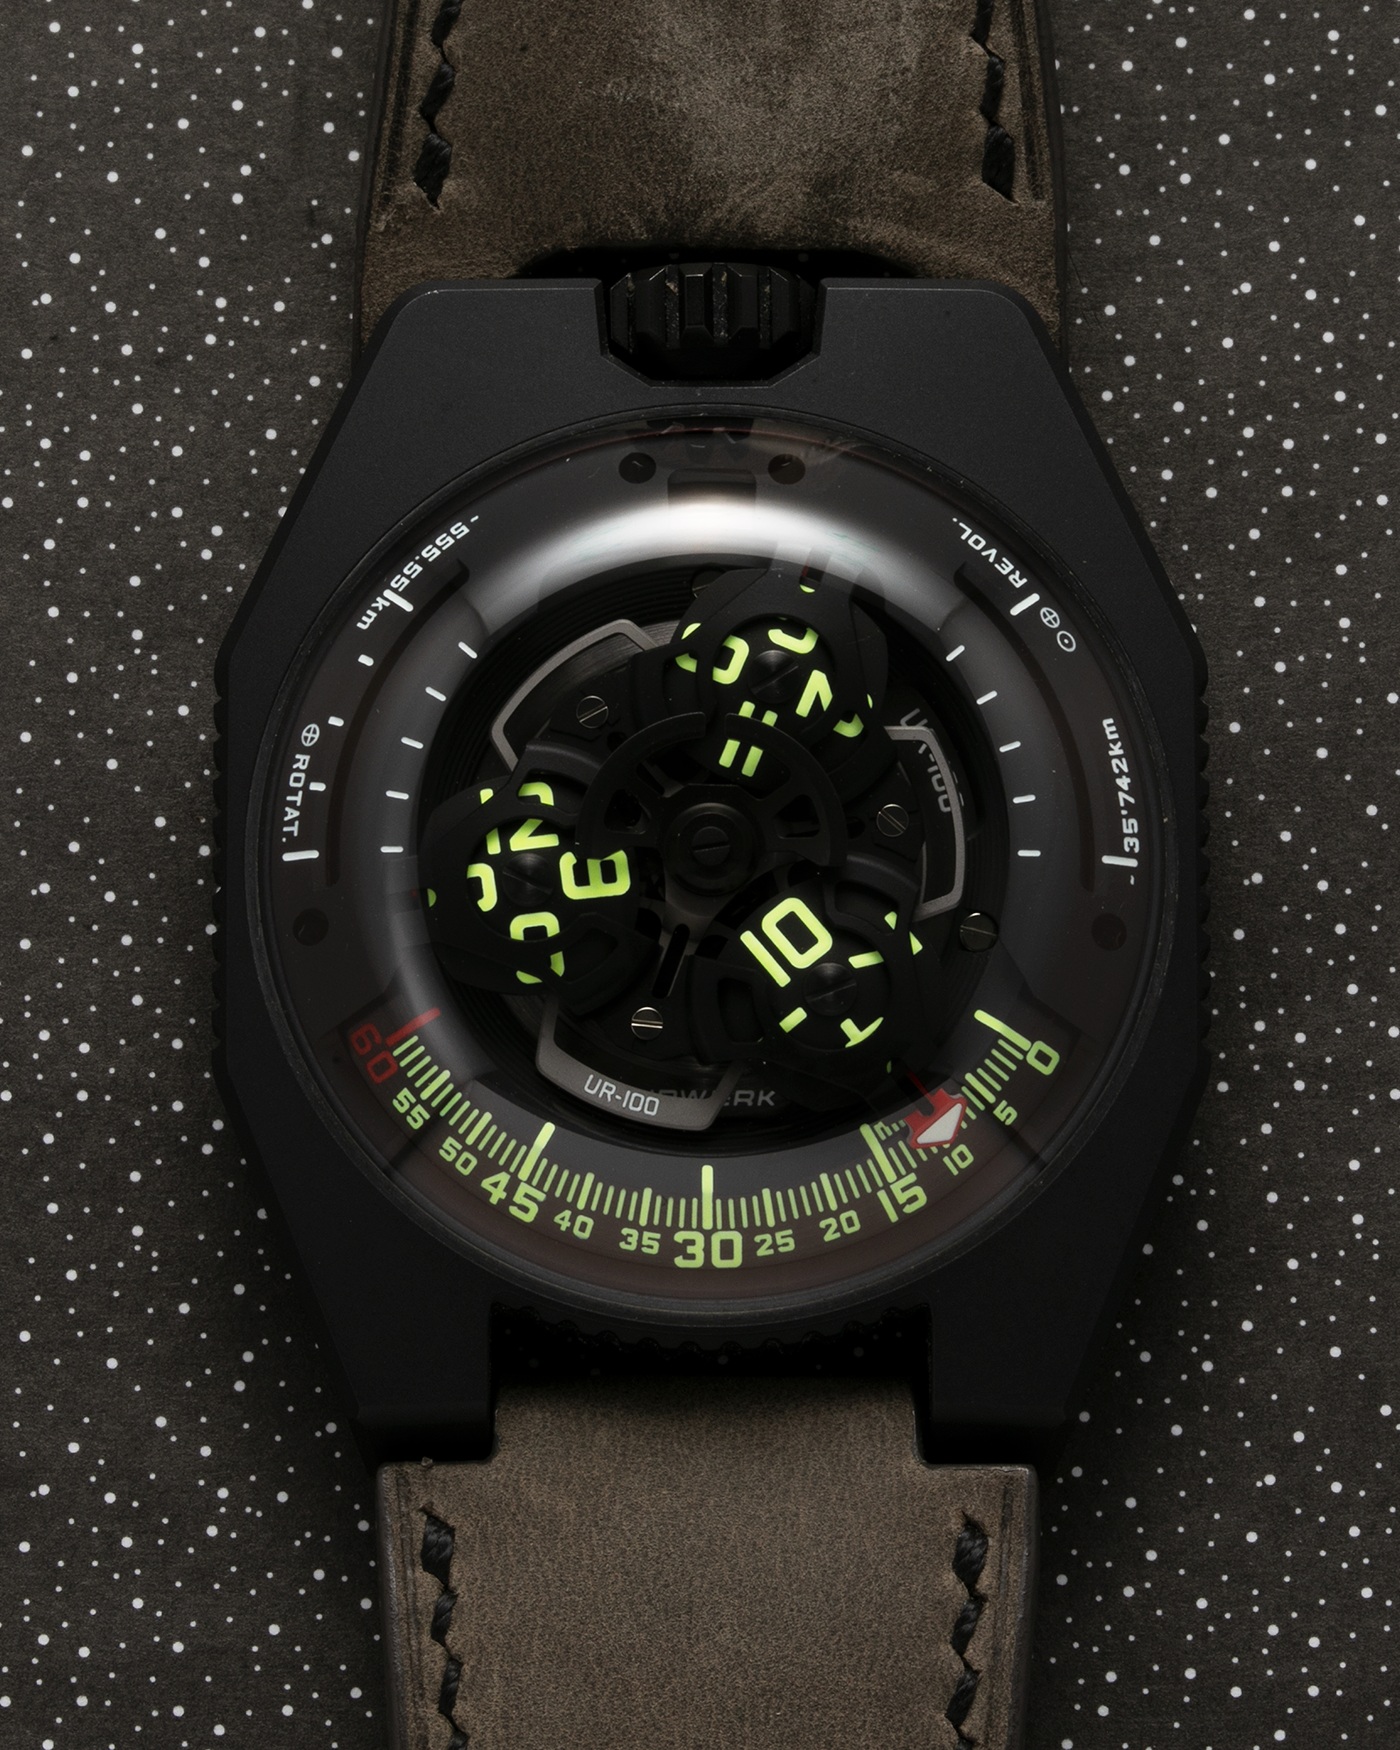 Brand: Urwerk Year: 2019 Model: UR100 Spacetime Black, Limited Edition of 25 pieces Material: Steel and Titanium, PVD Coated Movement: Urwerk Cal. 12.01, Self-Winding Case Dimensions: 41mm x 14mm Bracelet/Strap: Custom Moss Green Leather Strap with Signed Black DLC-Coated Titanium Tang Buckle, additional Urwerk Black Textile Strap 